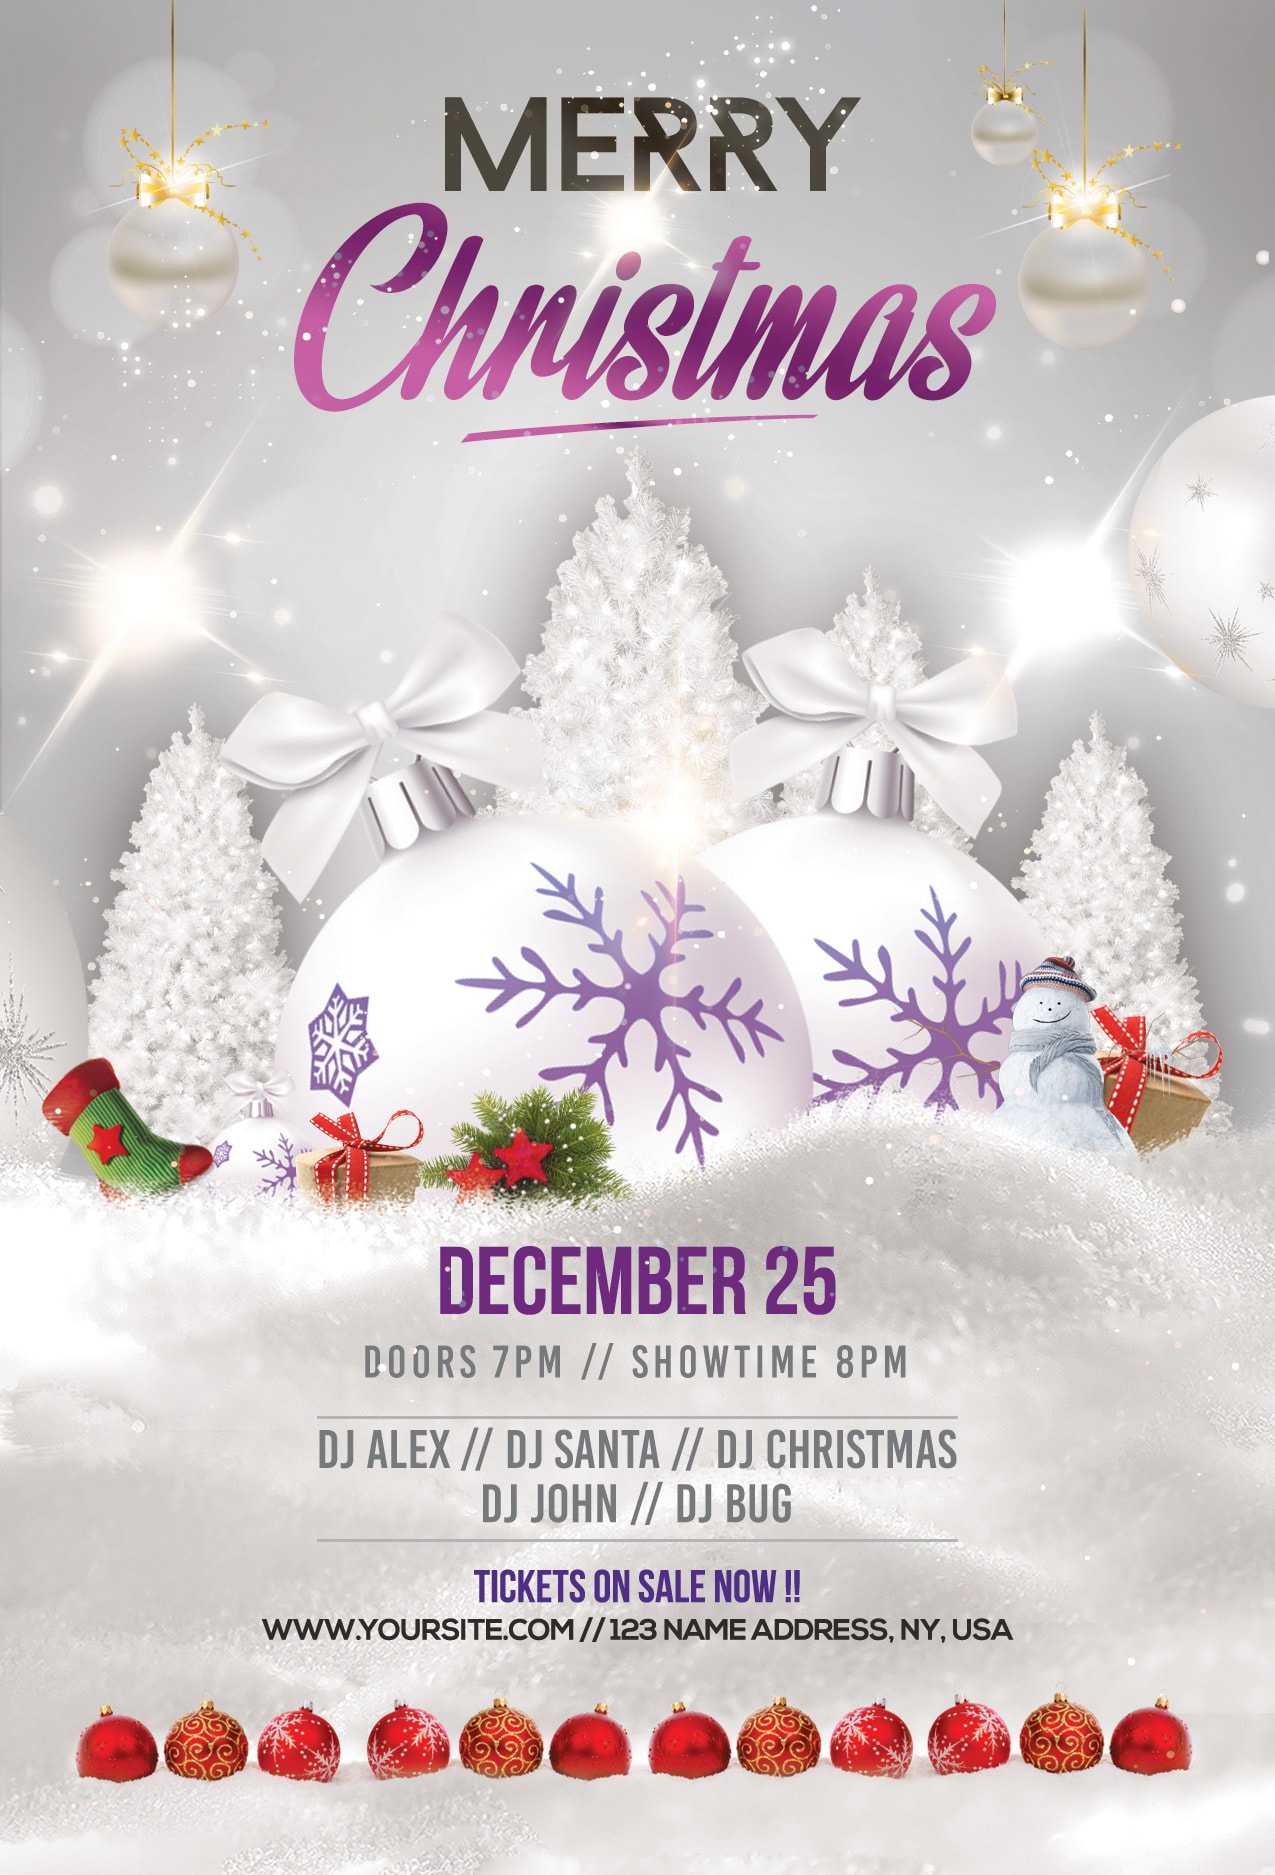 Merry Christmas & Holiday Free Psd Flyer Template - Stockpsd Intended For Christmas Brochure Templates Free